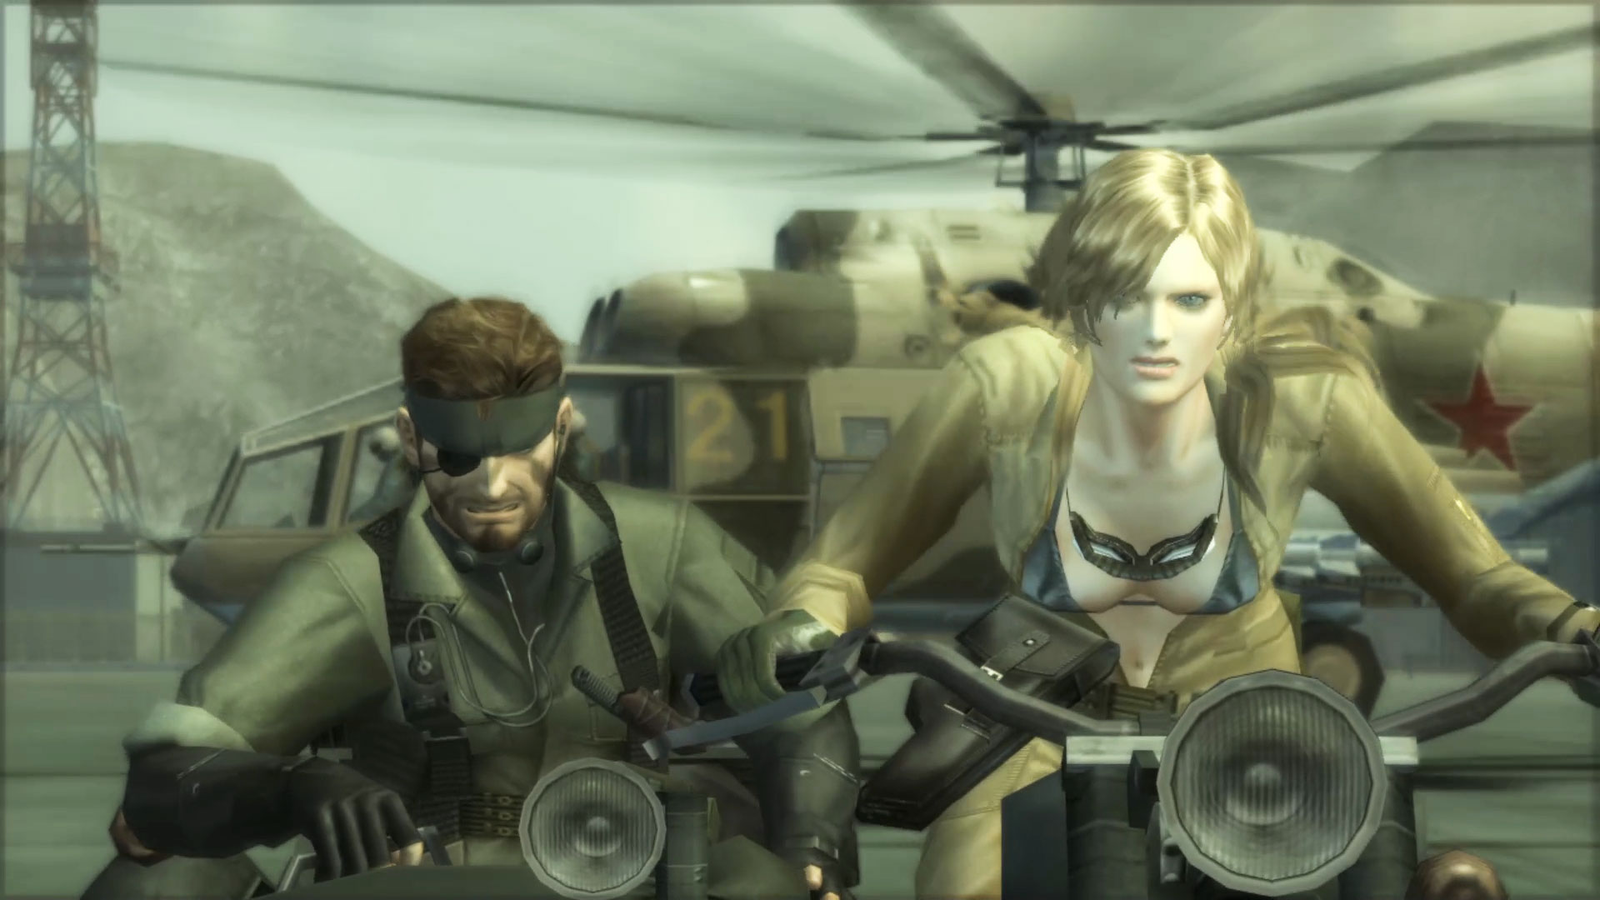 Metal Gear Solid collection has two more games than expected